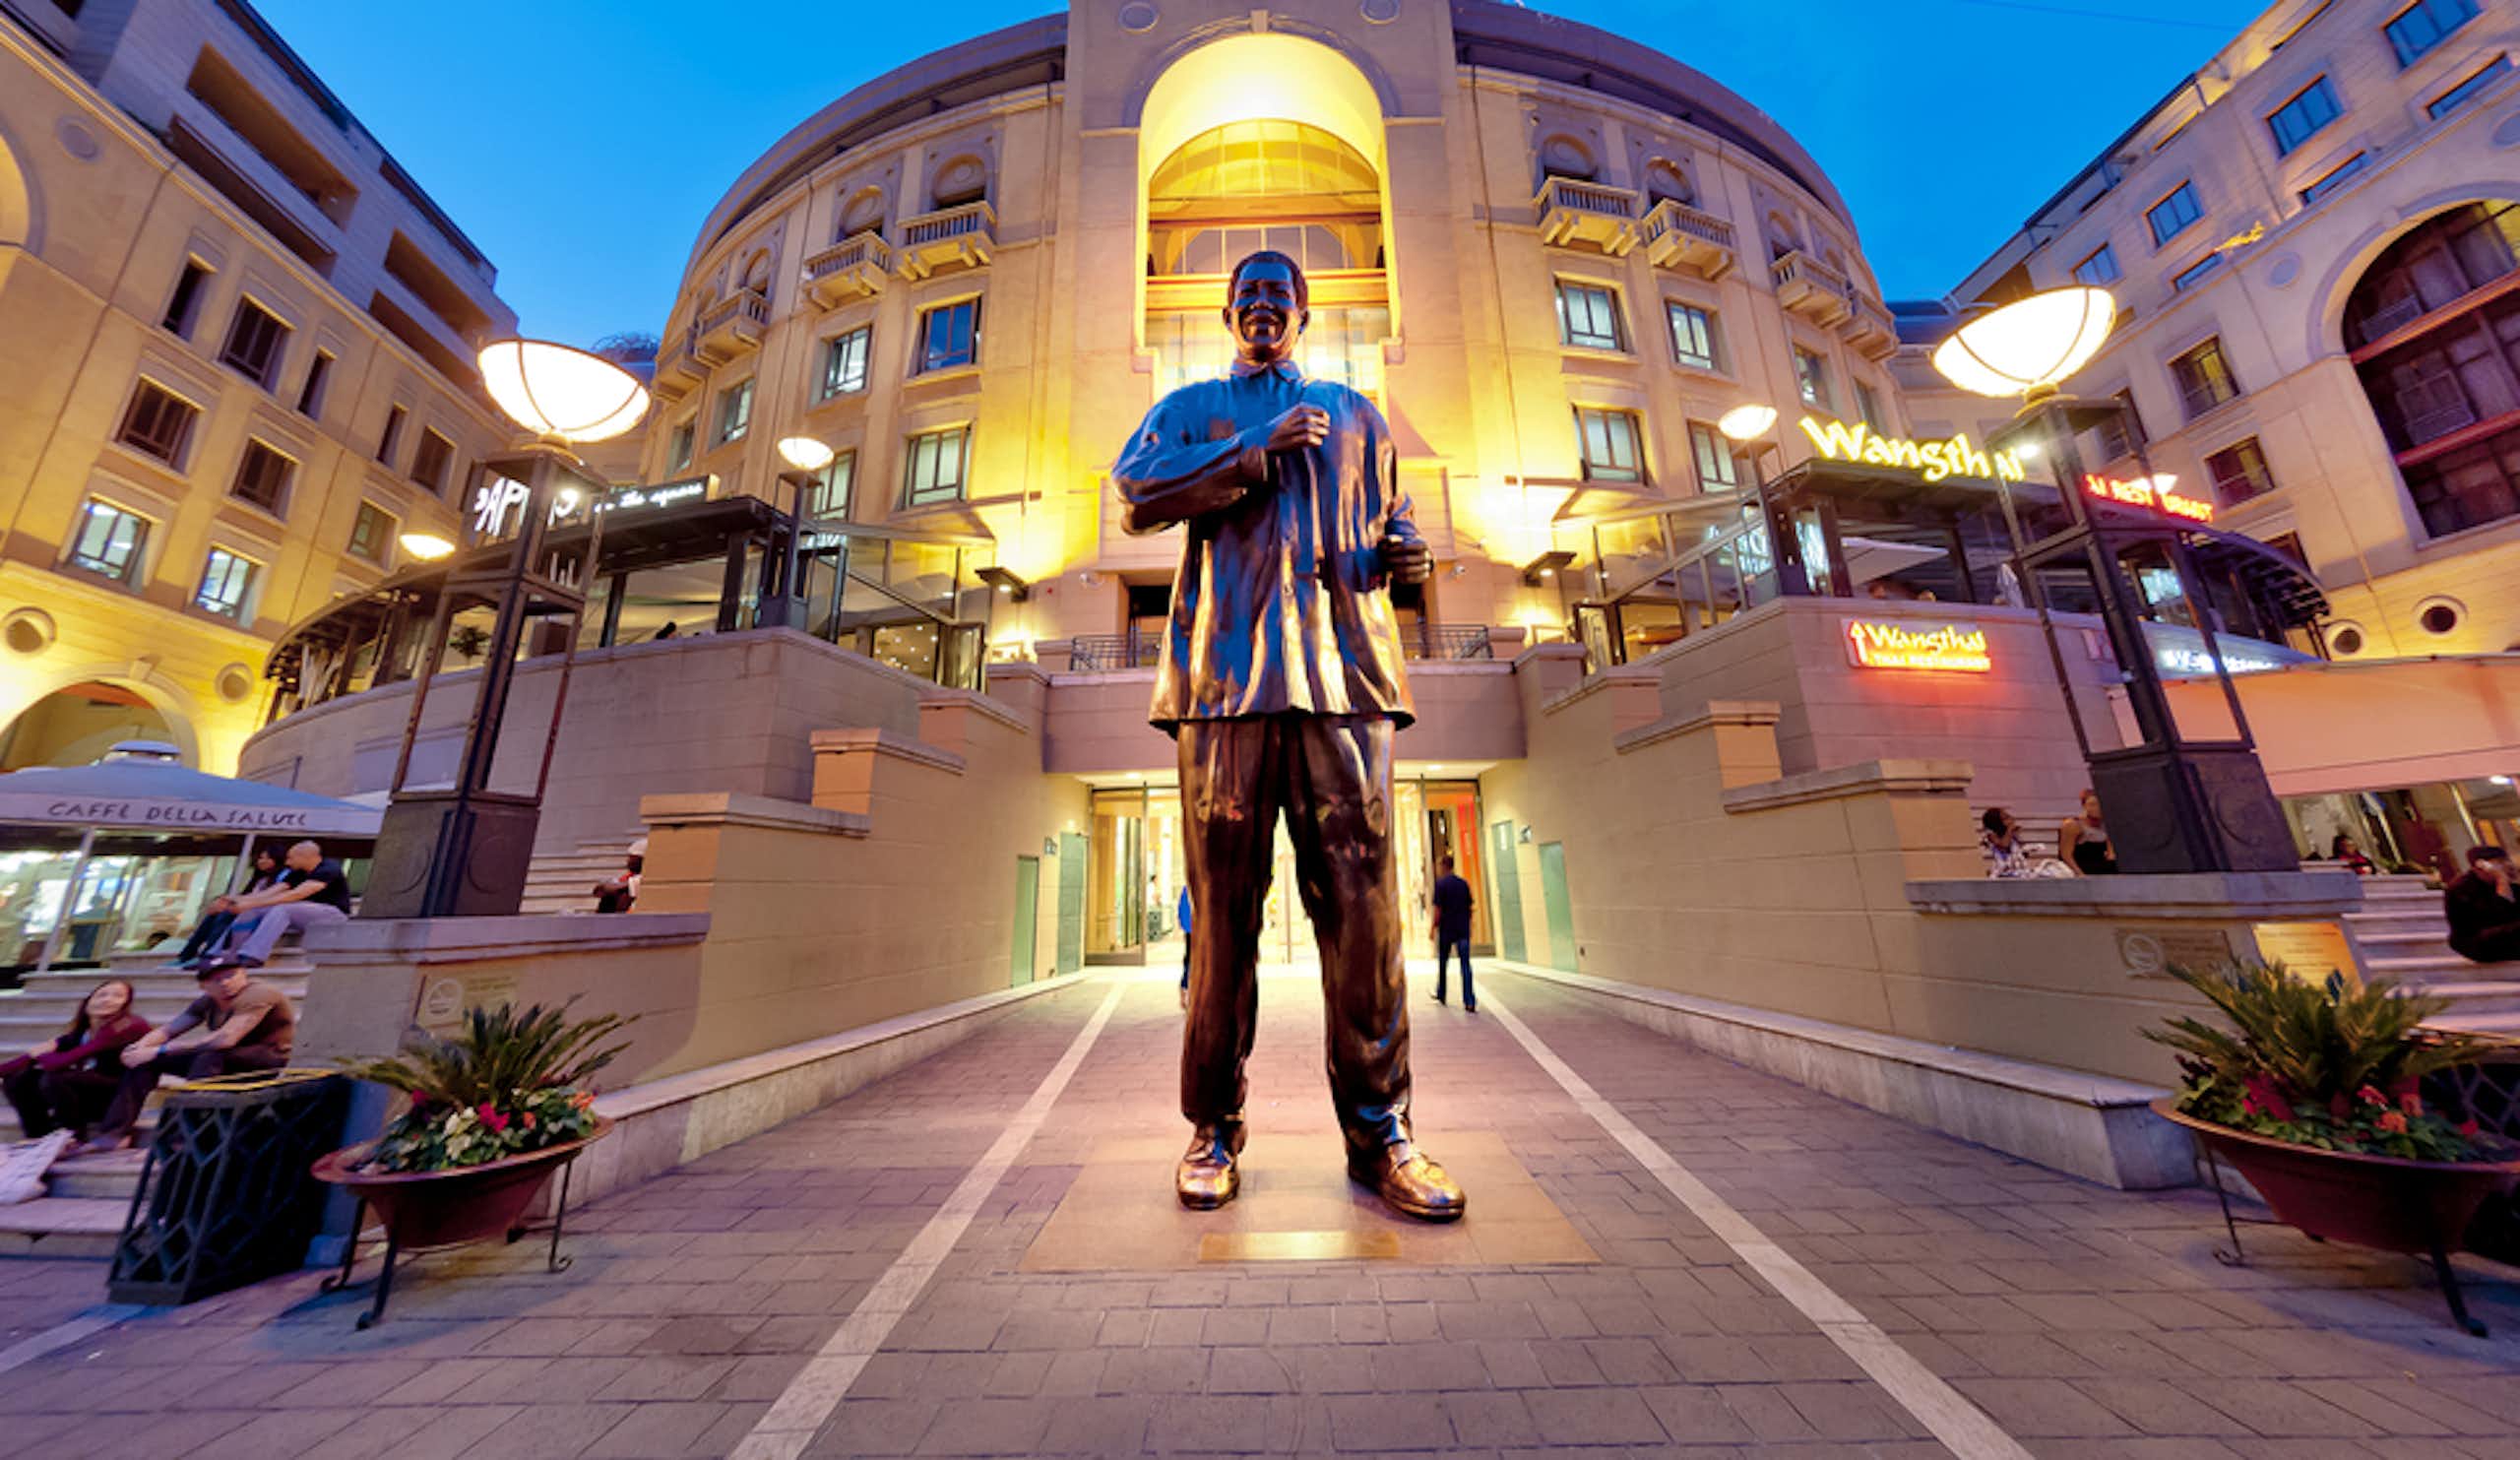 A large bronze statue of a man in a loose shirt, his arms poised in dance. He stands at the lit-up entrance to shops.